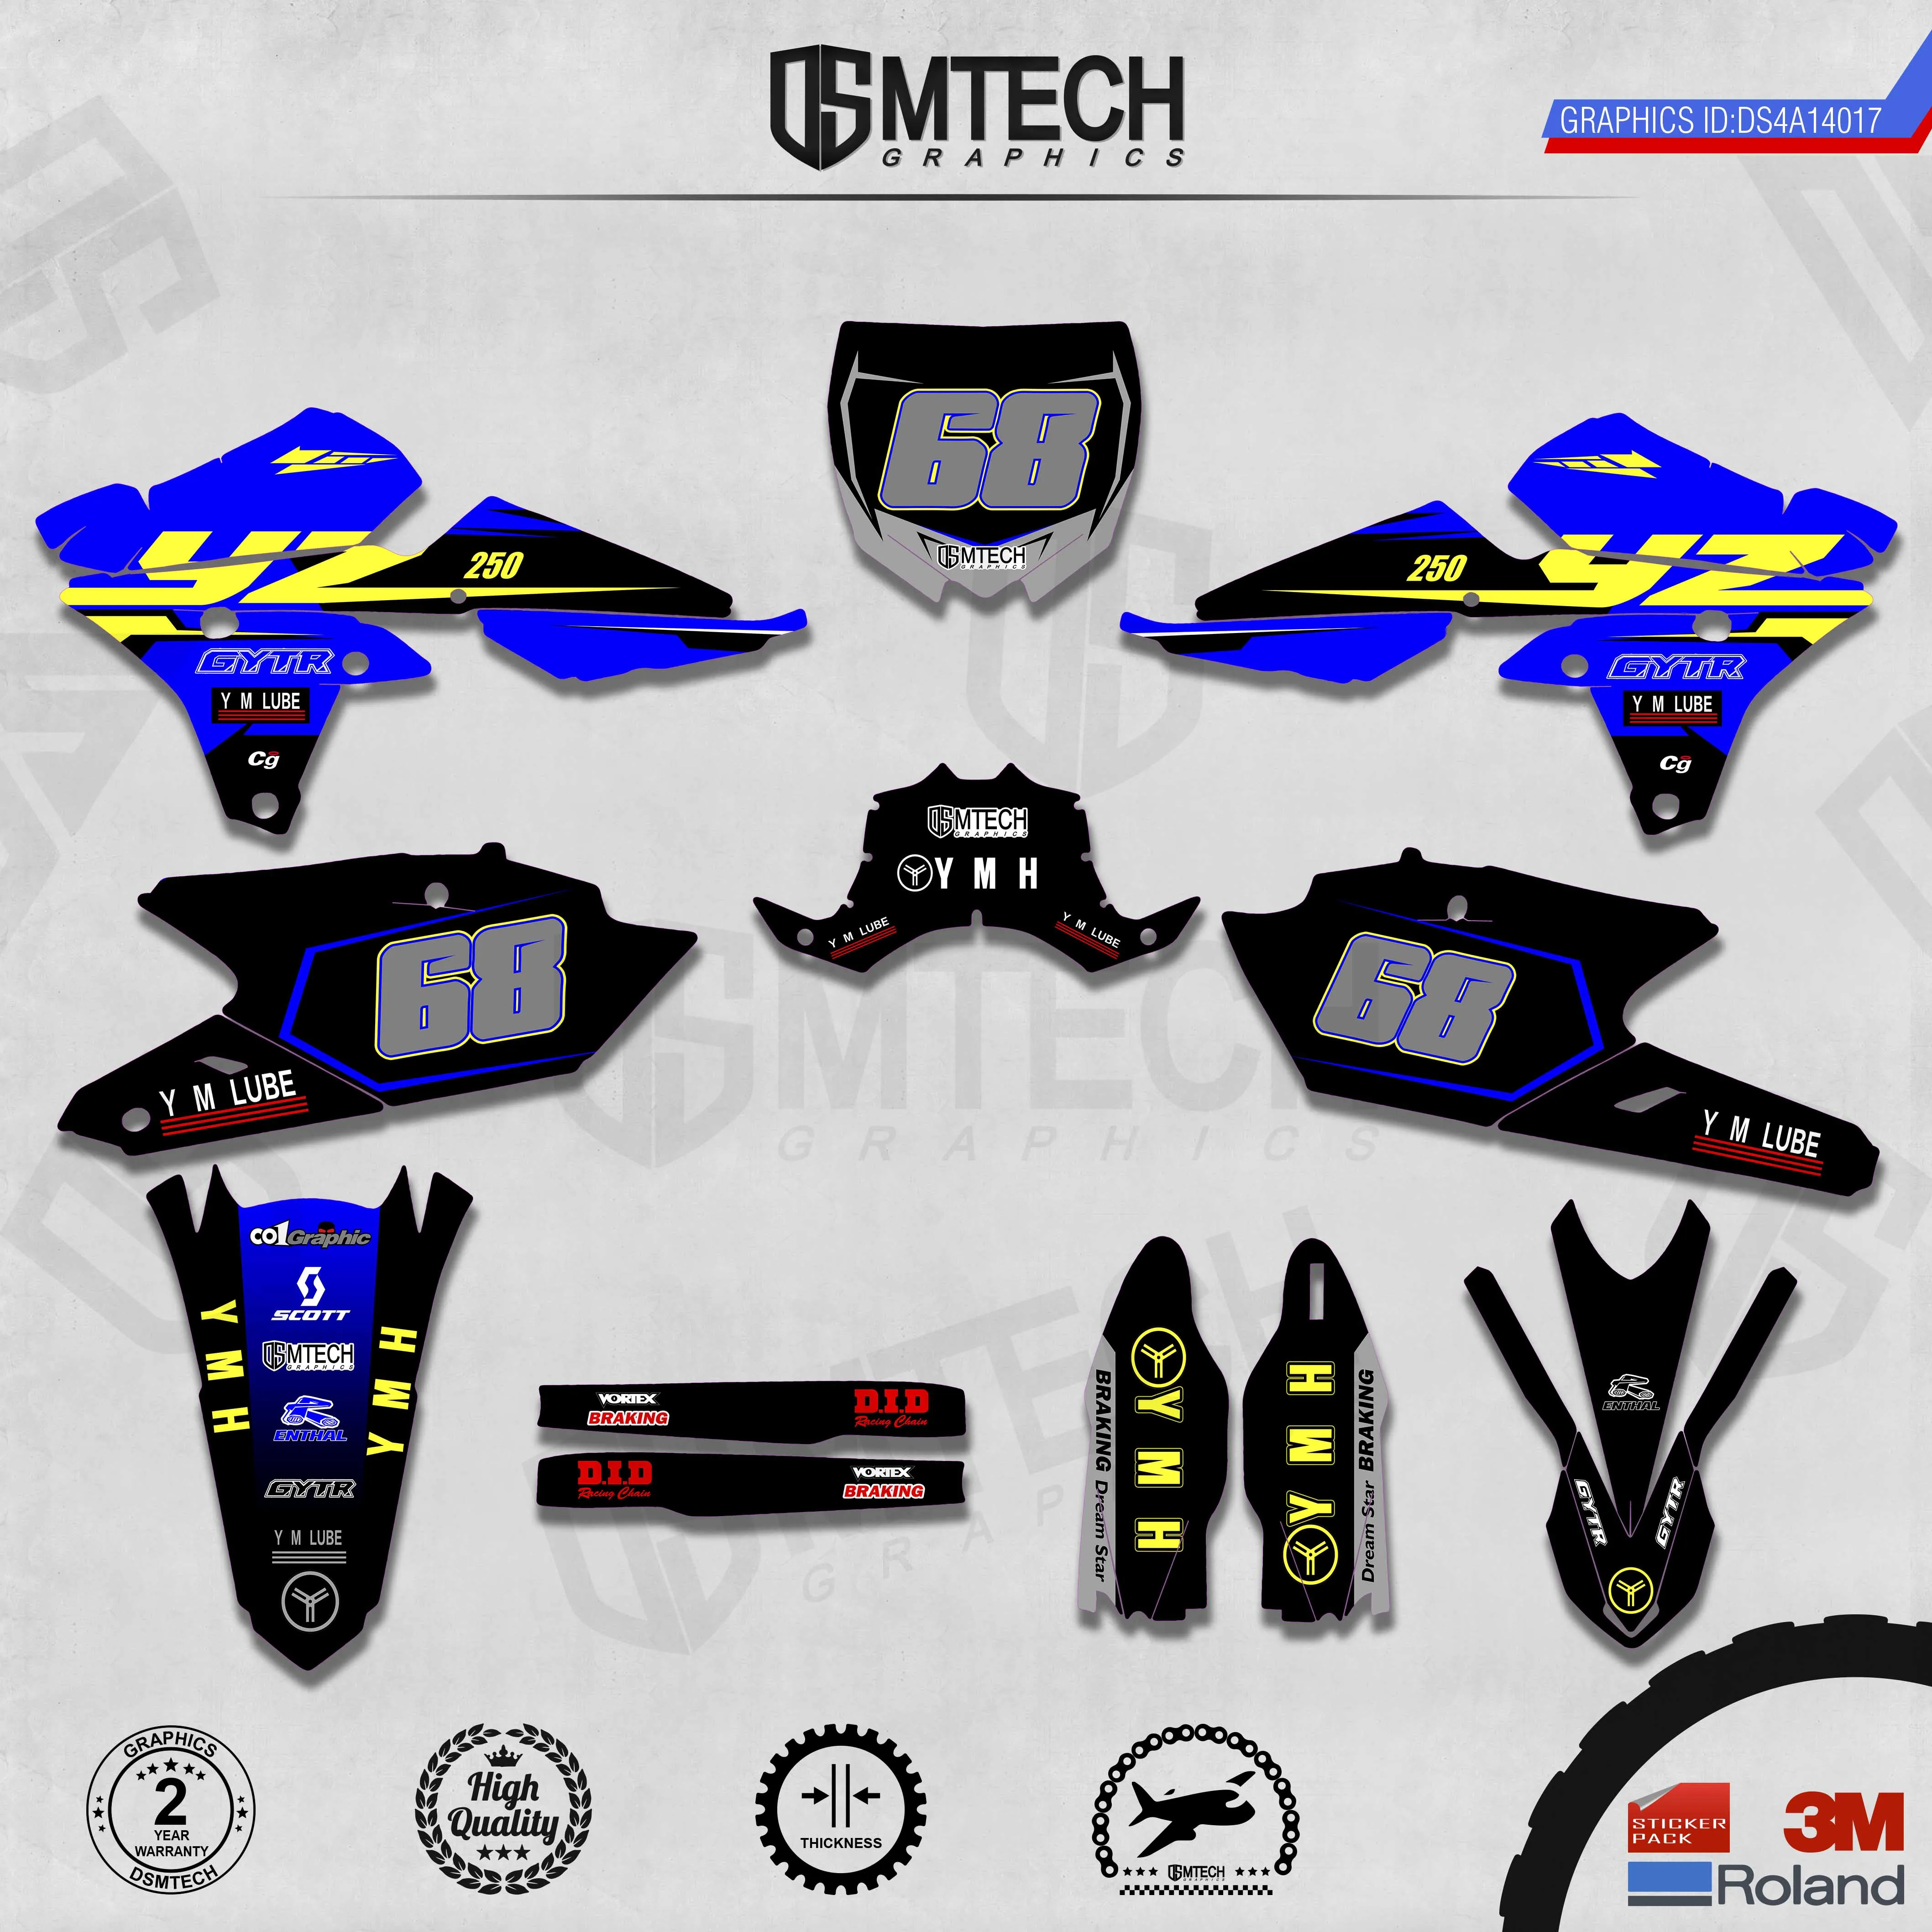 dsmtech-customized-team-graphics-backgrounds-decals-3m-custom-stickers-for-14-18-yz250f-15-19-yz250fx-wrf250-14-17-yz450f-017